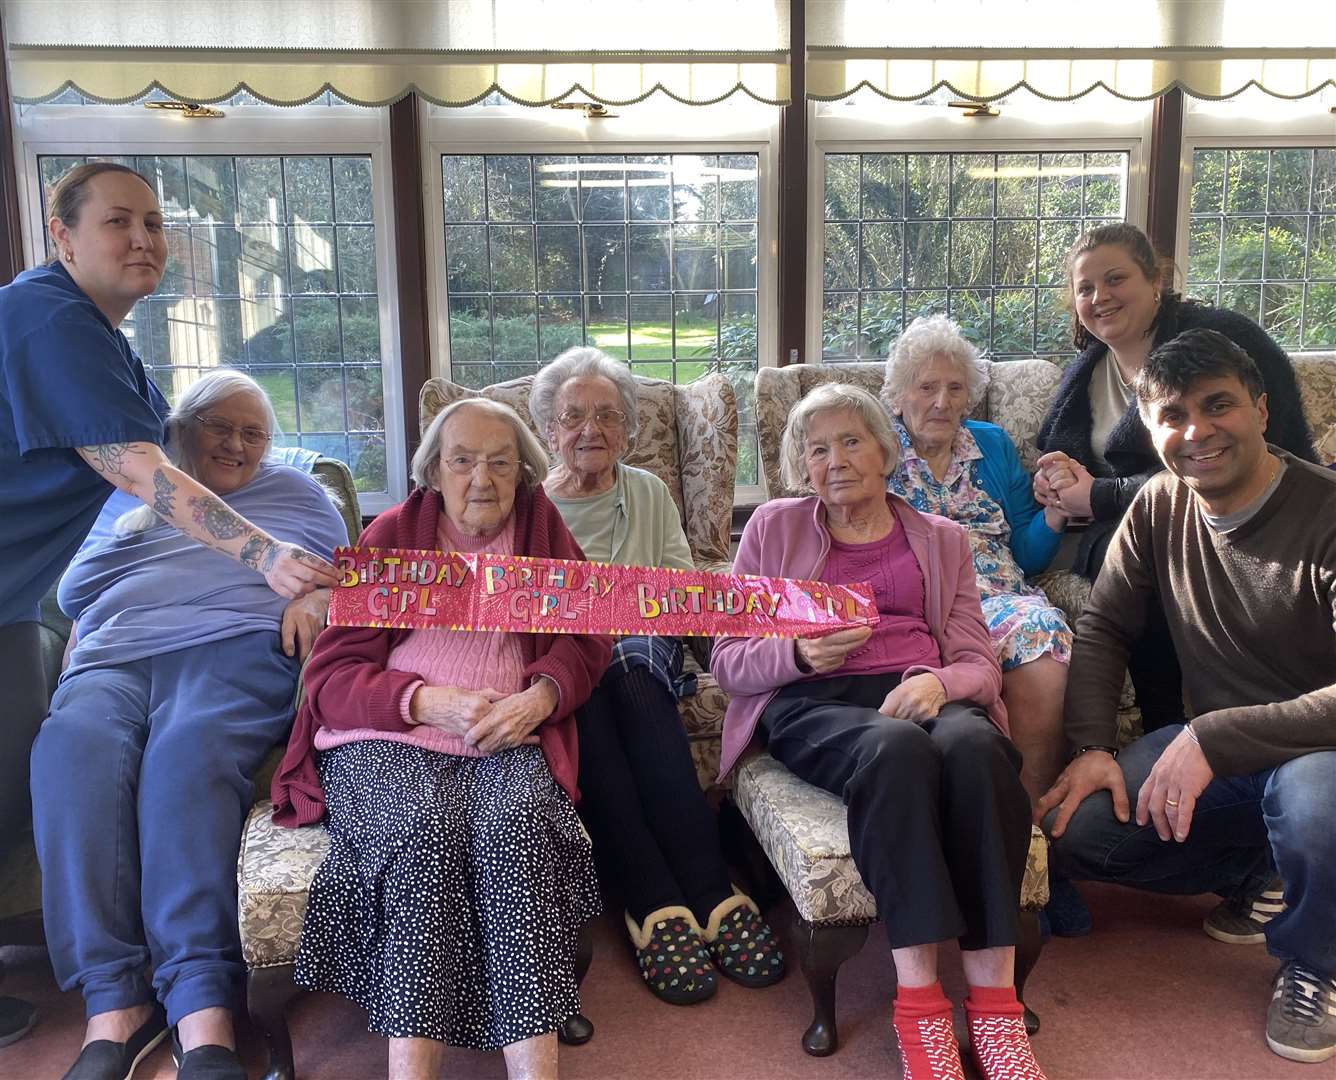 From left, care assistant Maria, Jean, 78, Margorie, aged 100, Ivy, Jean, aged 87, Rose, aged 93, care assistant Stacè, and care home owner, Richy, celebrating Ivy's birthday